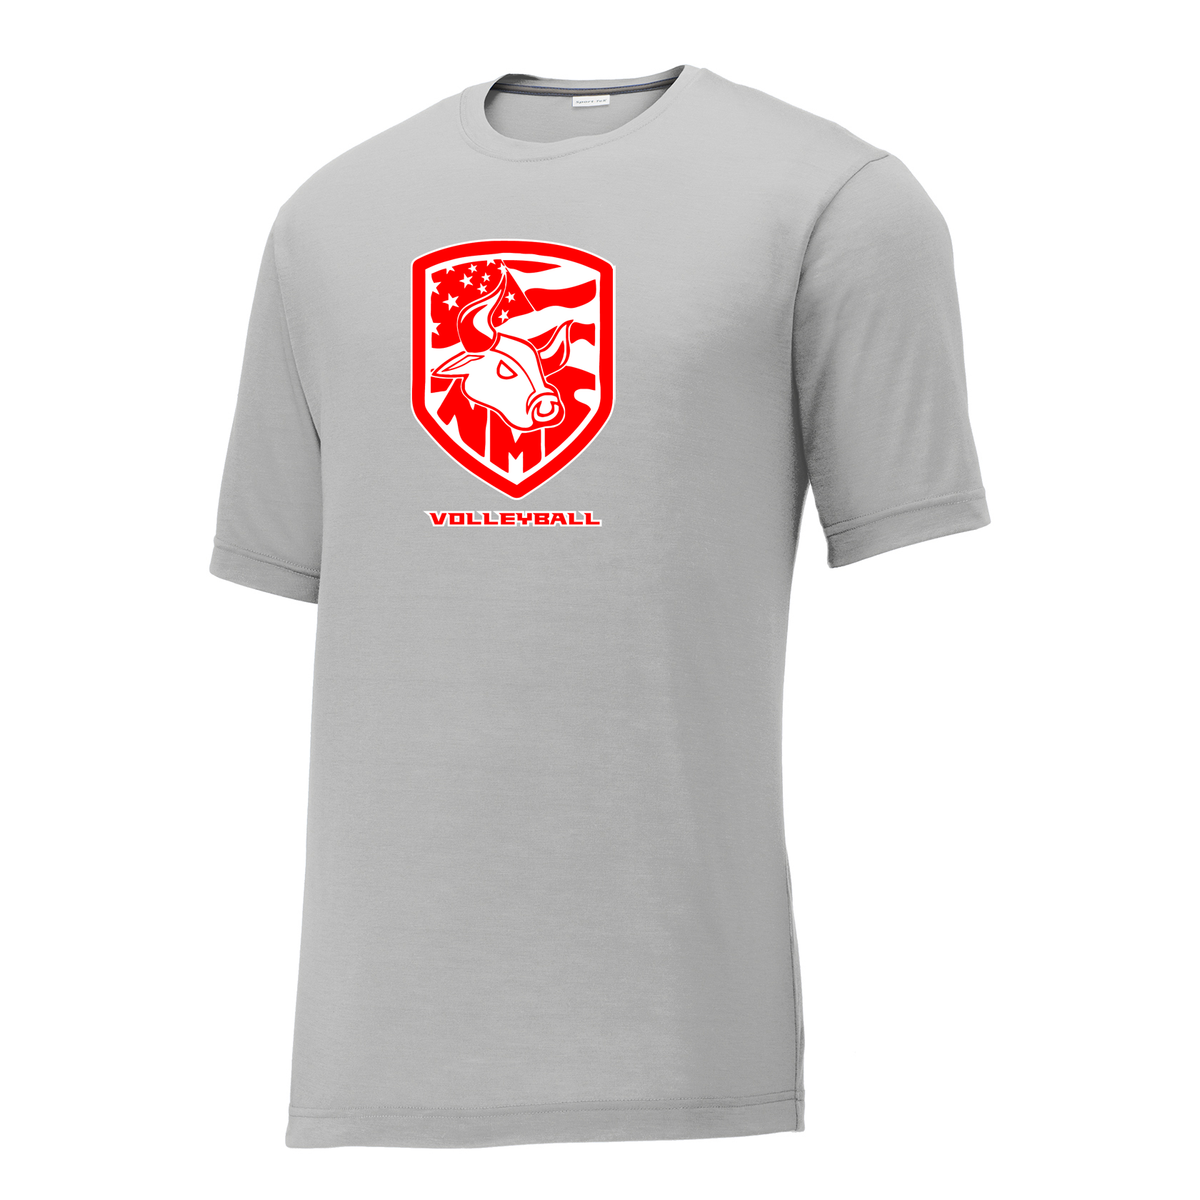 Nesaquake Volleyball CottonTouch Performance T-Shirt